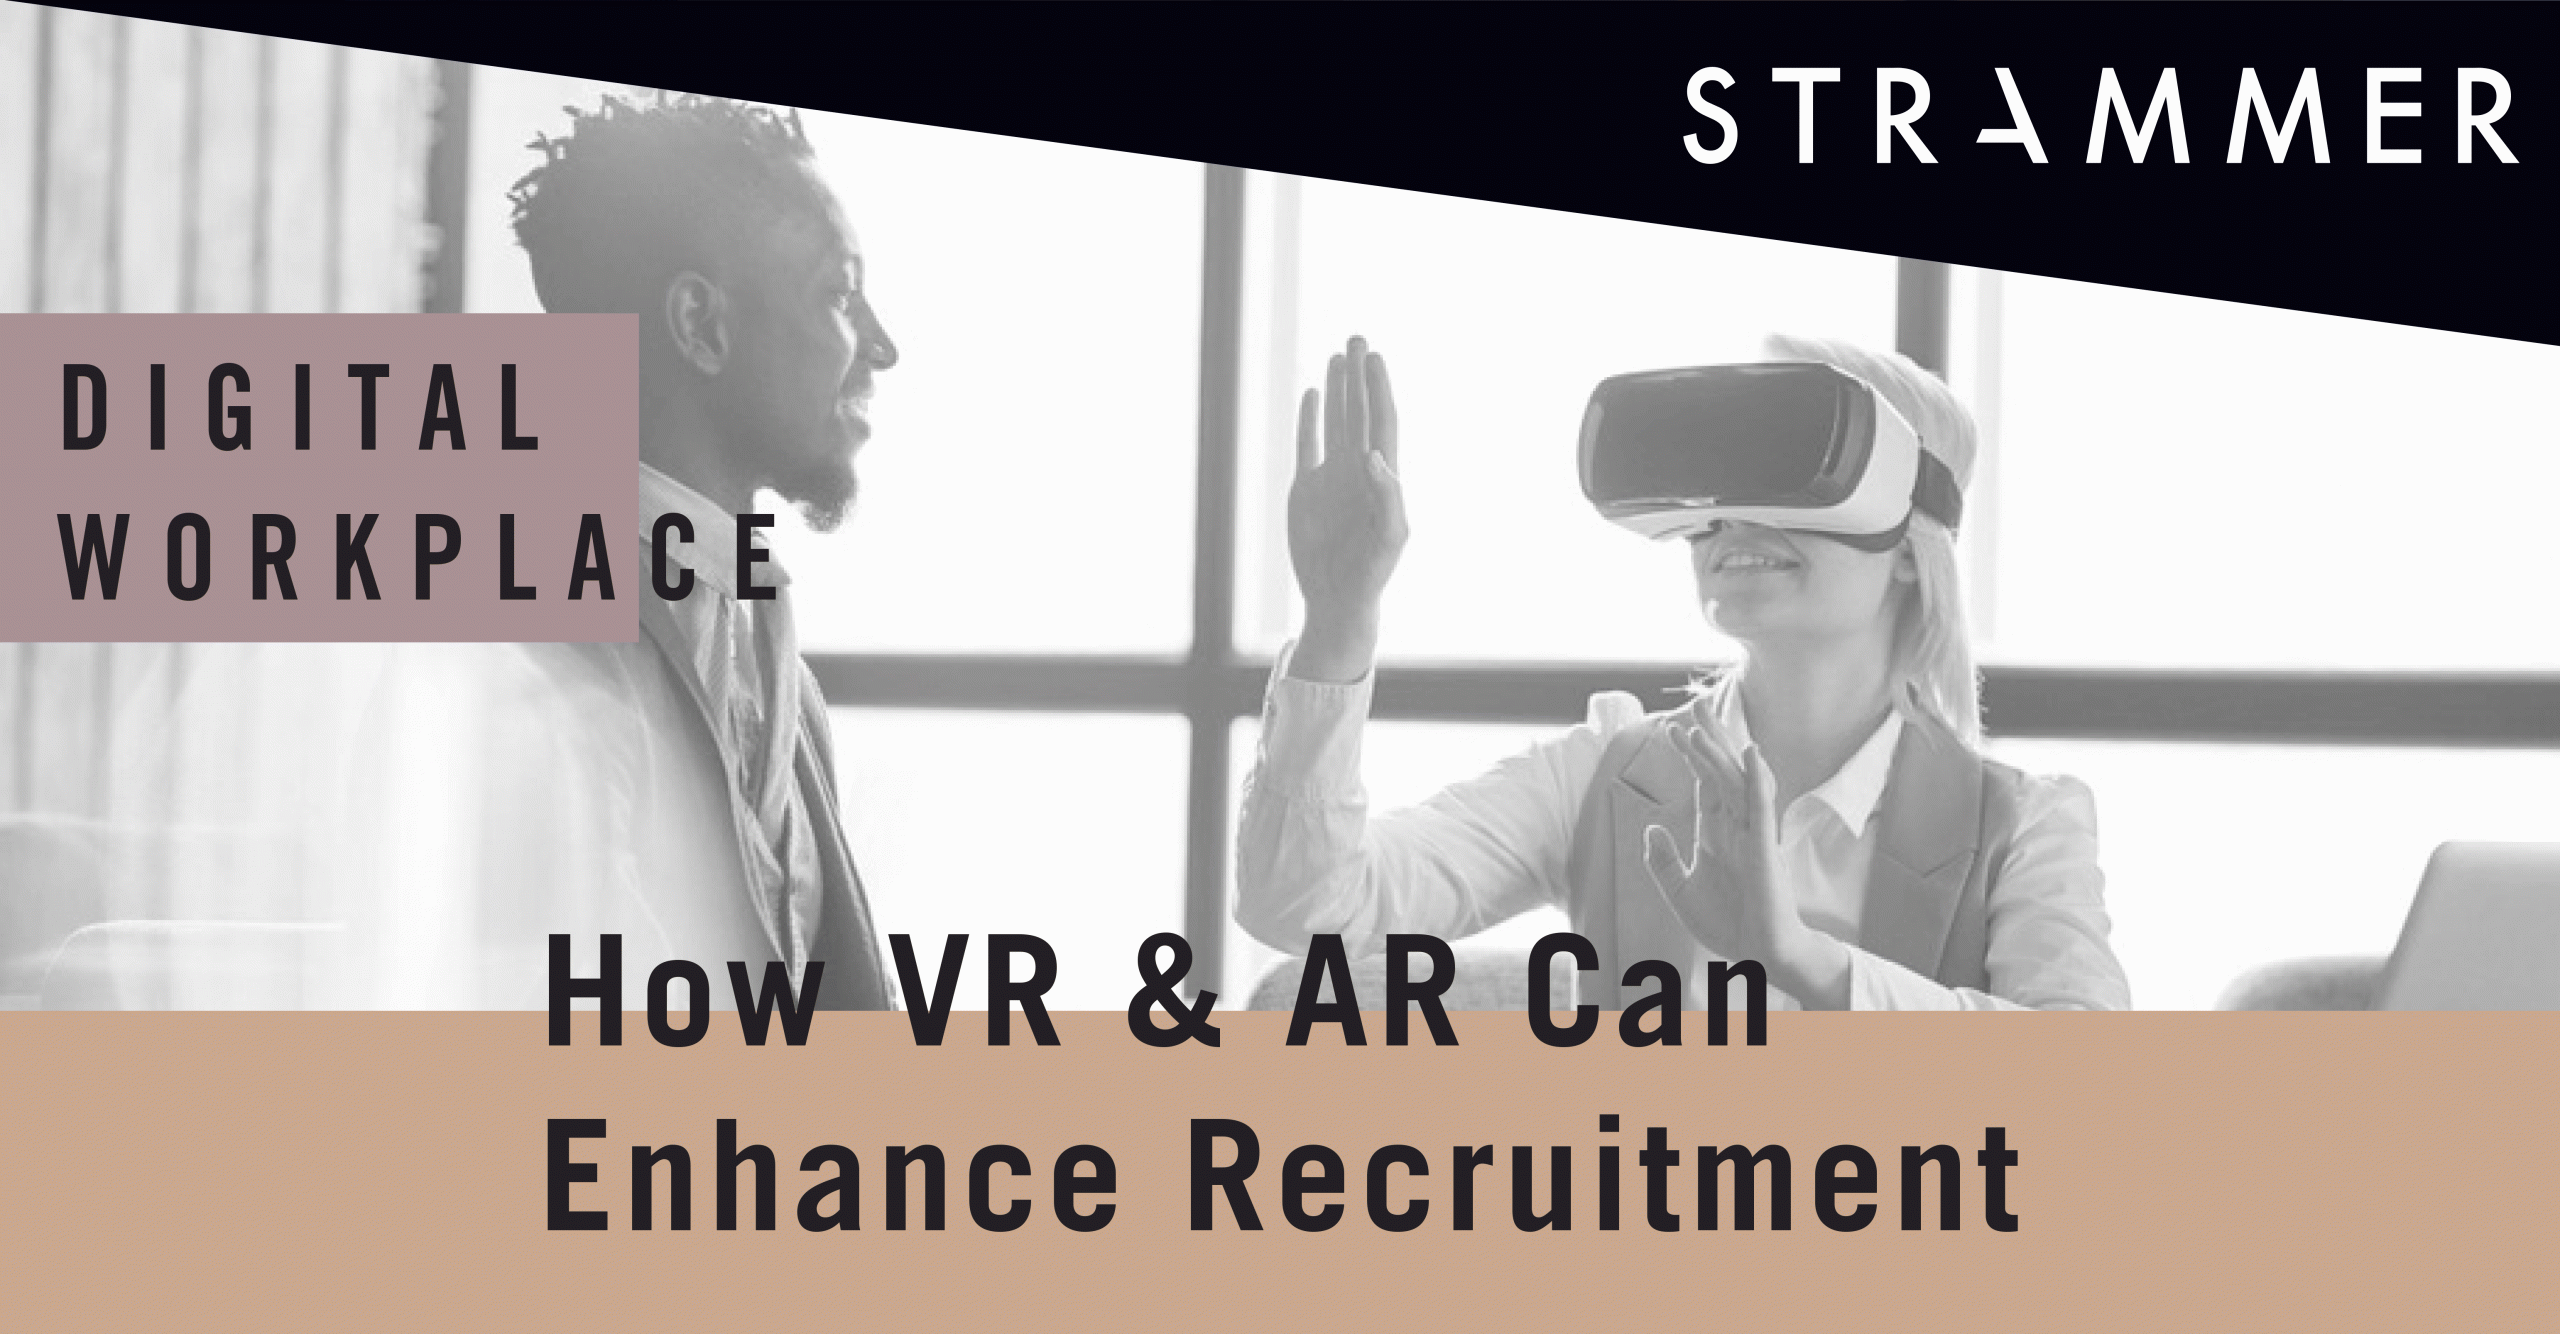 How VR and AR Could Enrich The Recruitment Process